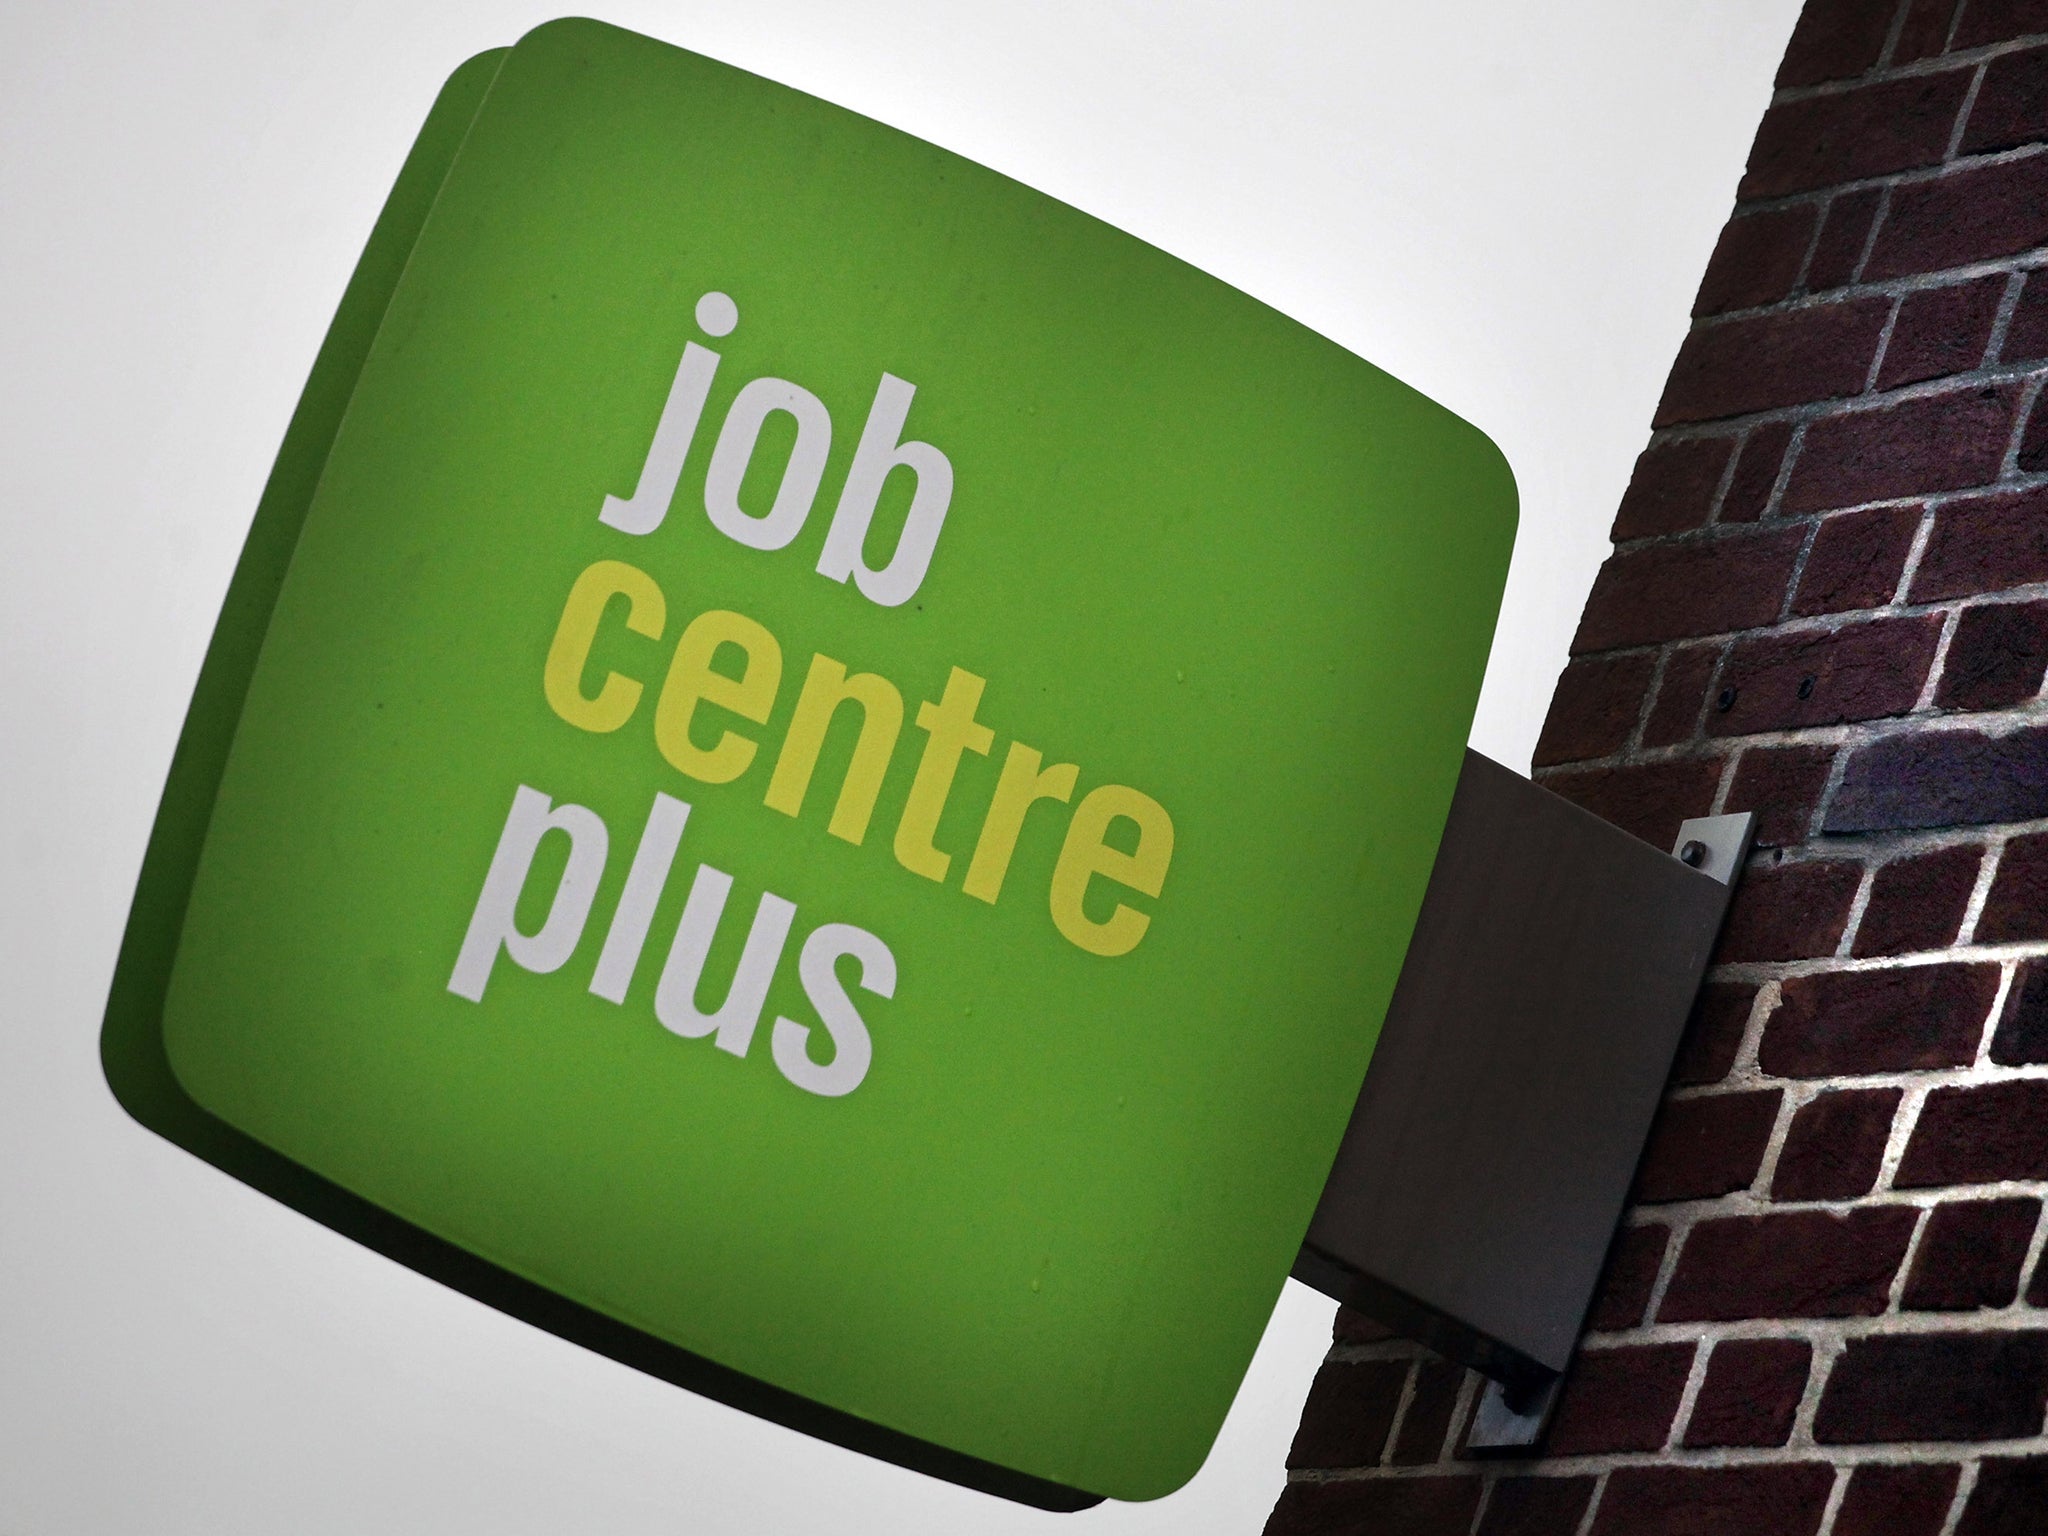 Leaked reports from individual Job centres suggest that some targets have been set locally